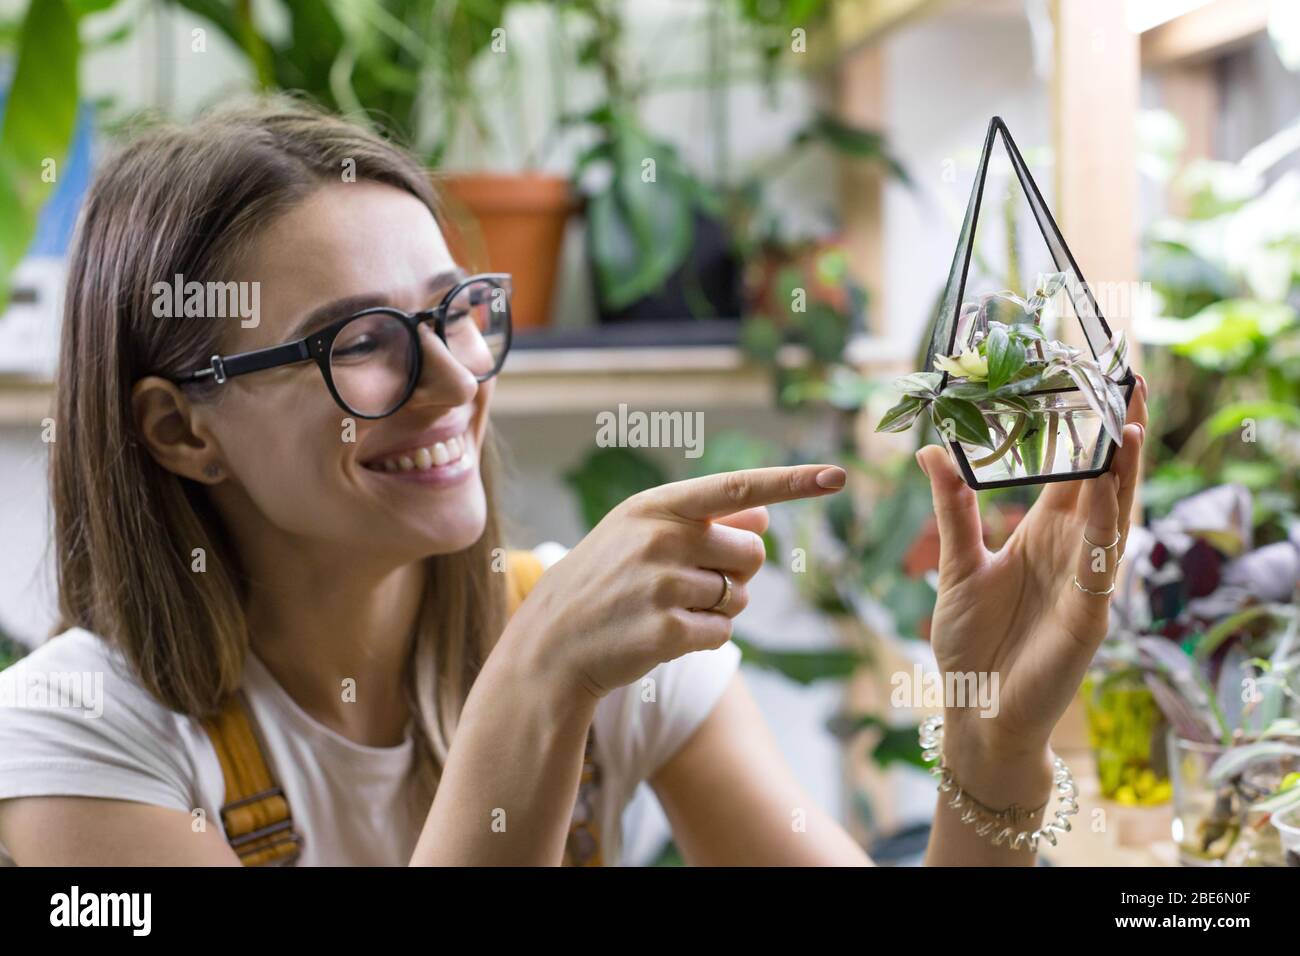 Smiling woman gardener in spectacles shows index finger on cuttings of tradescantia in a small glass florarium for plant germination, potted houseplan Stock Photo